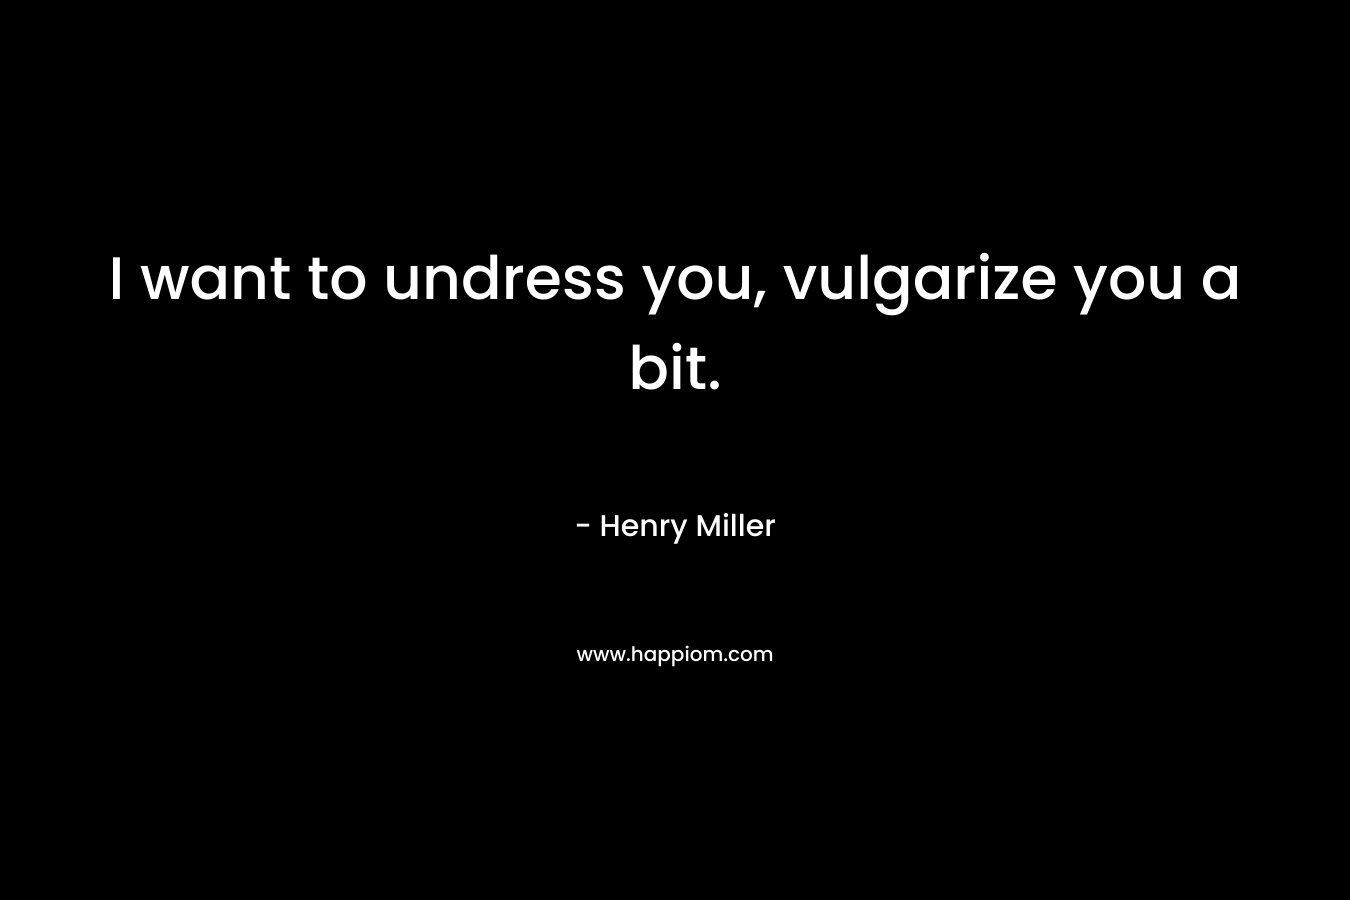 I want to undress you, vulgarize you a bit.